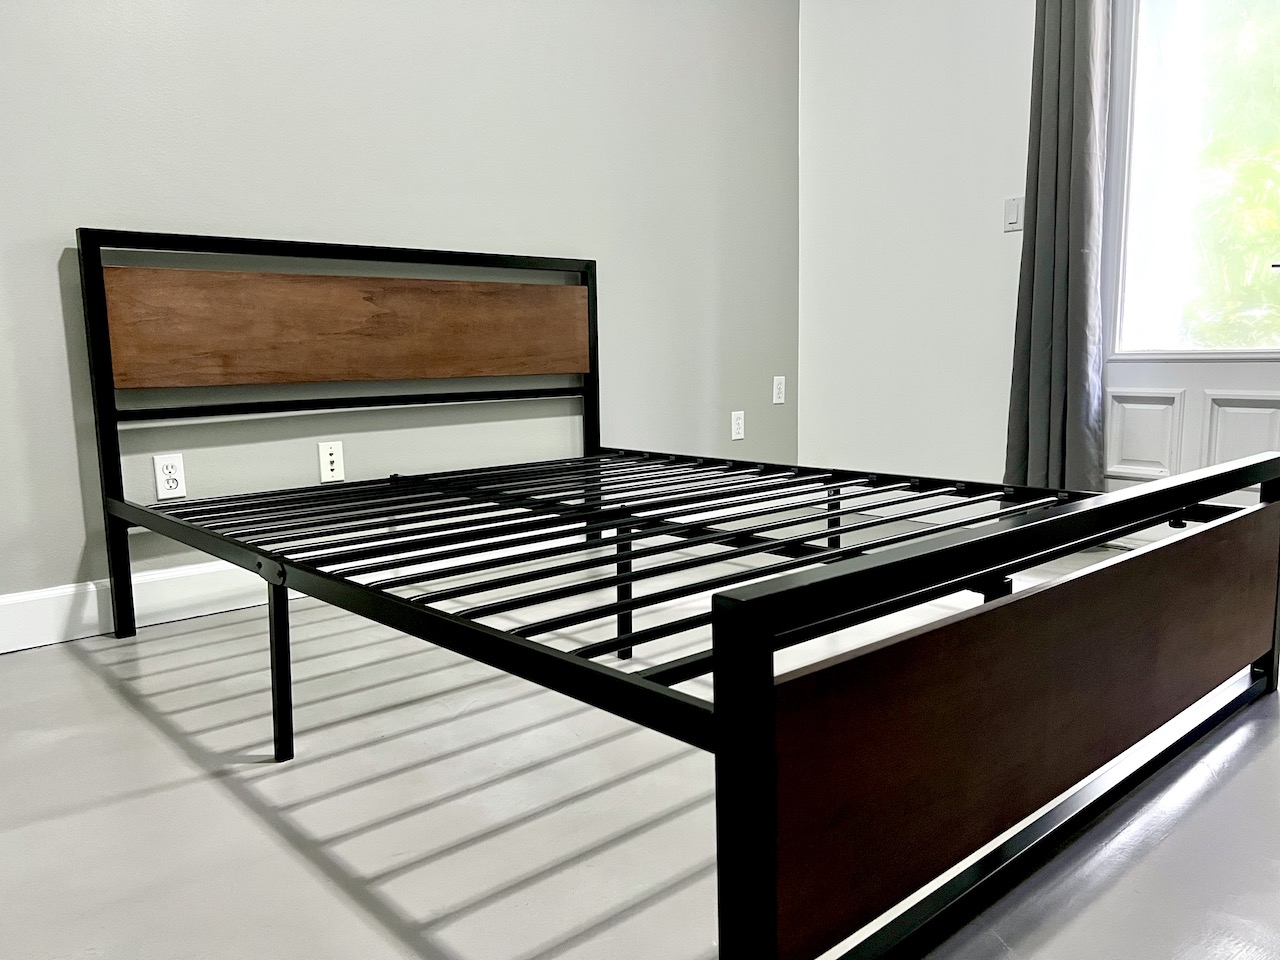 Dreamcloud trenton bed frame review